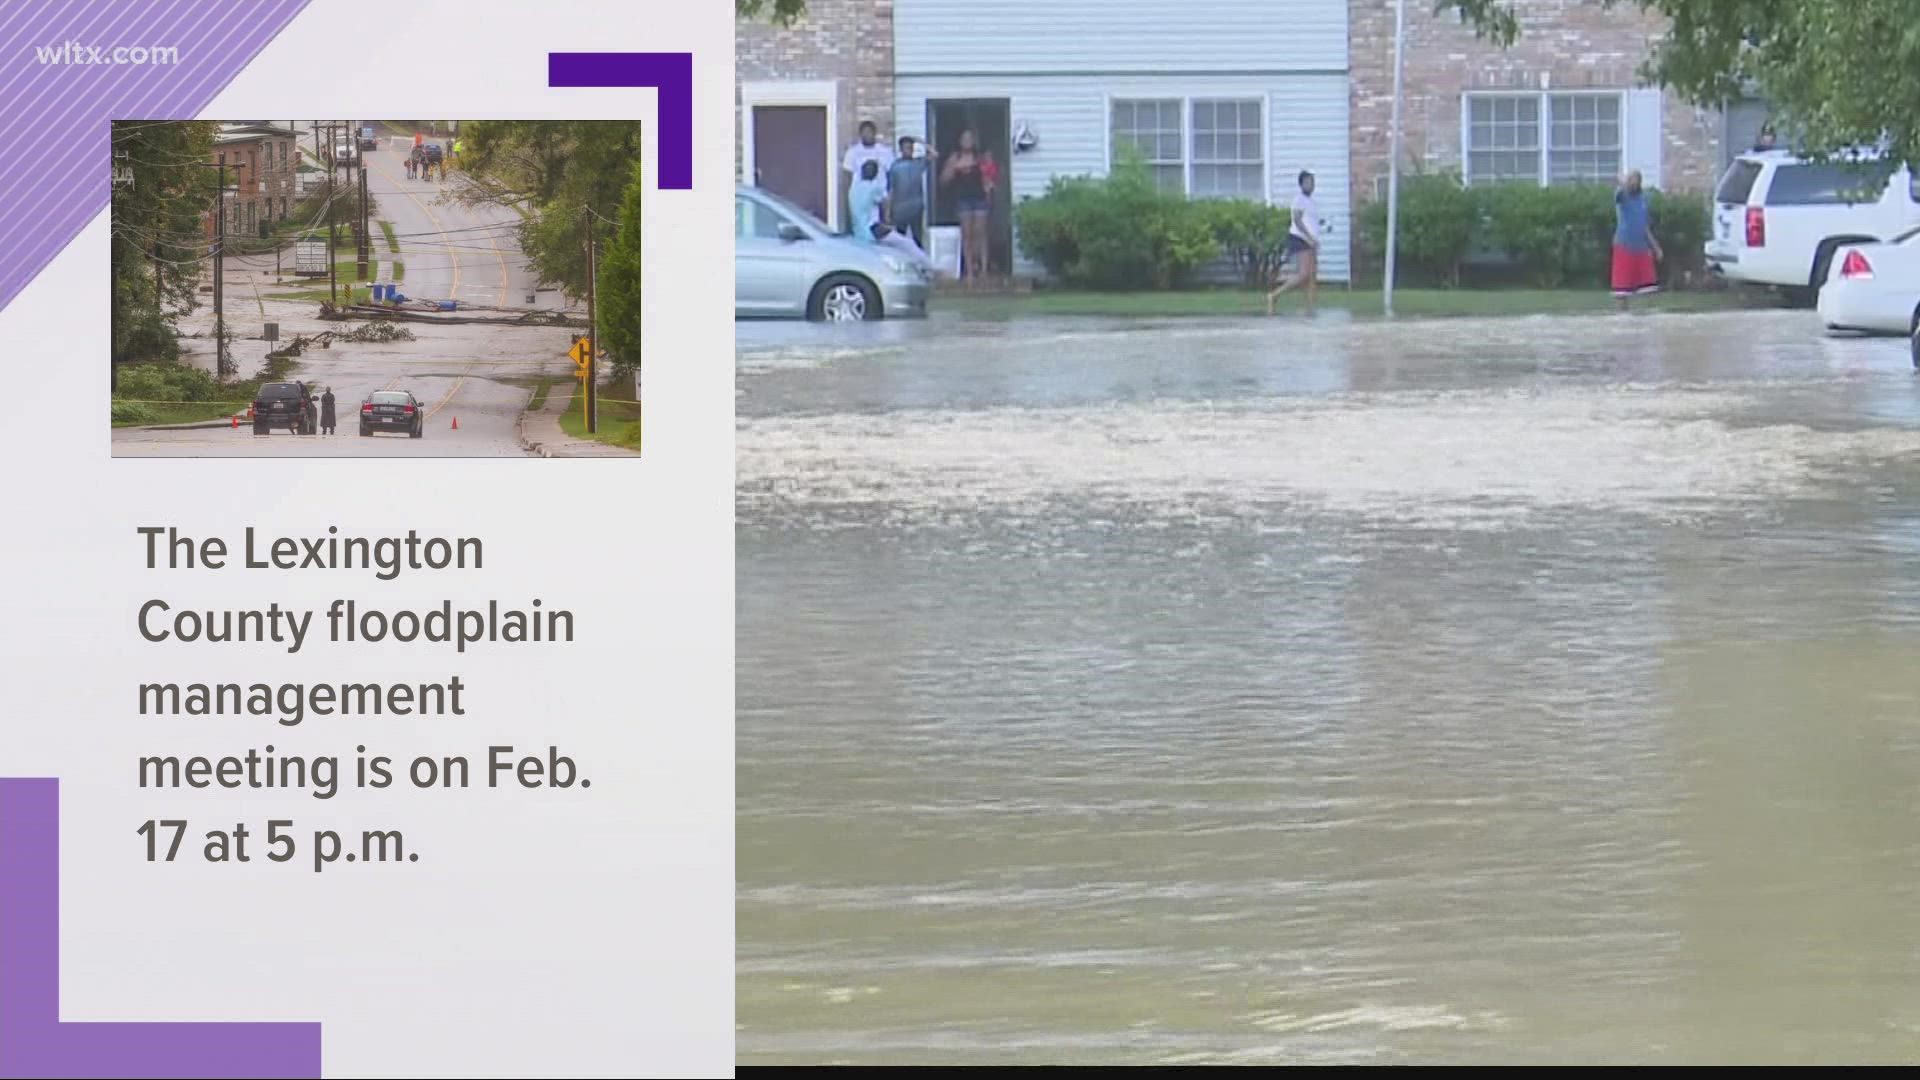 The county of Lexington is getting ready to update its flood management plan and they want input from people who live around the county.